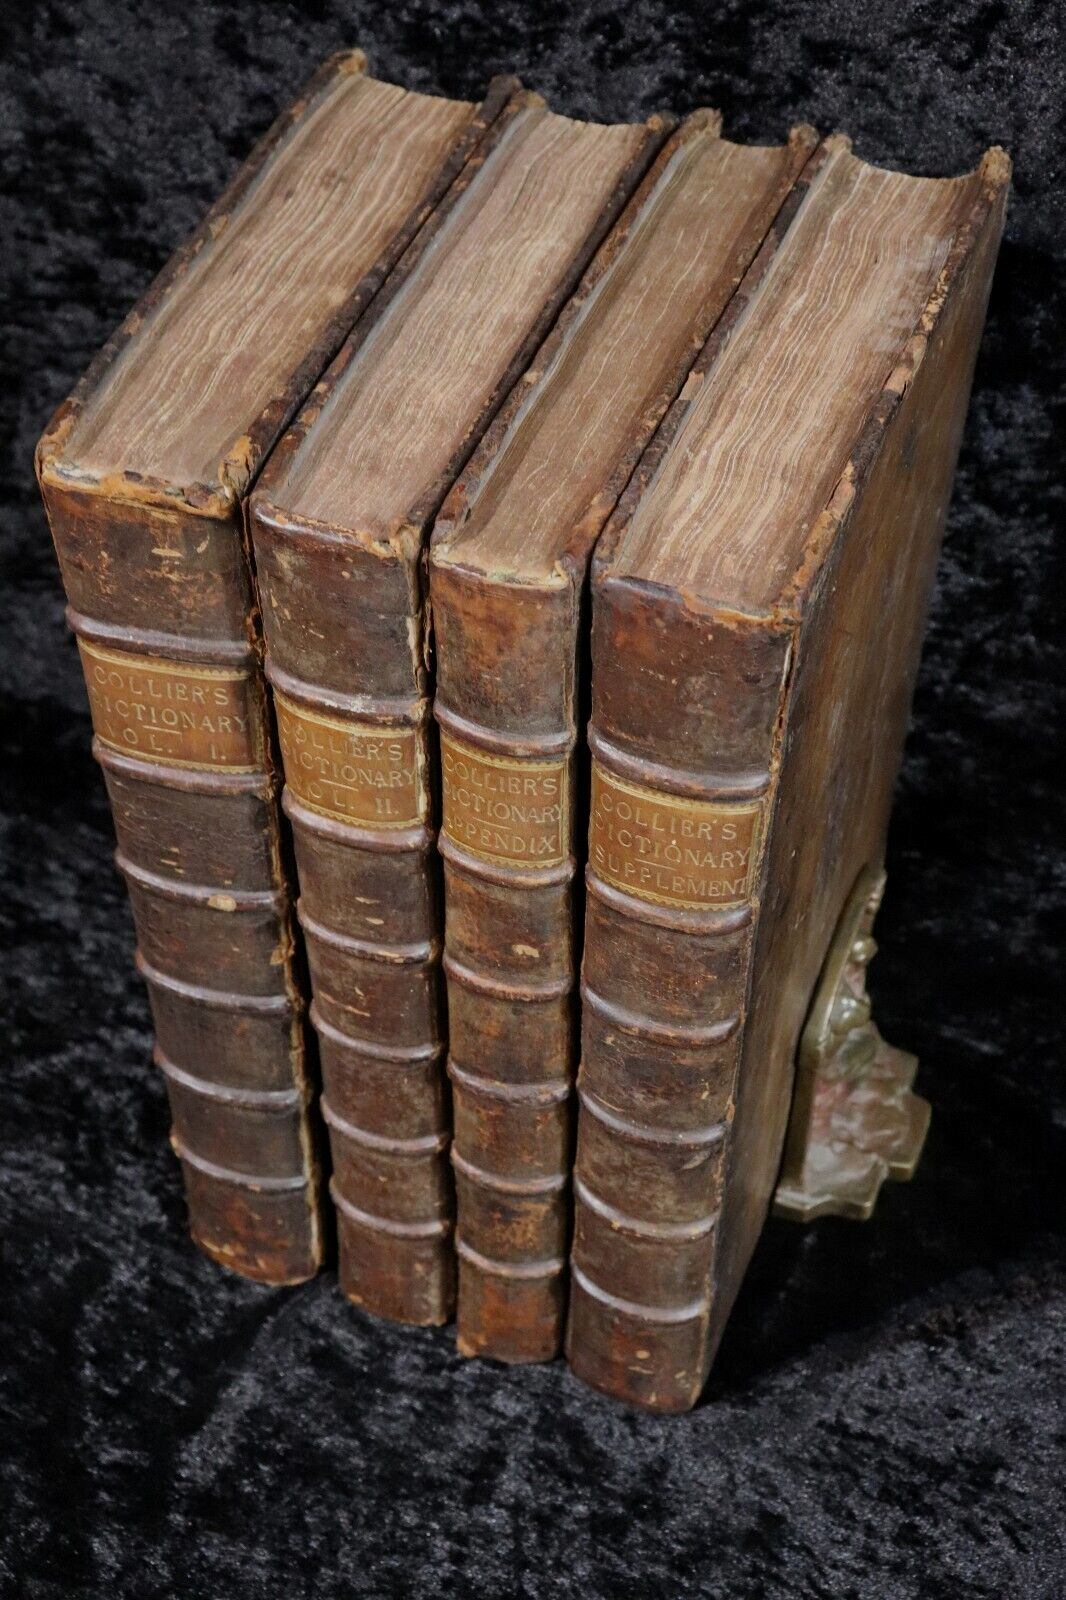 1701 -1721 4vol Jer Collier's Great Dictionary Series Antiquarian History Books - 0